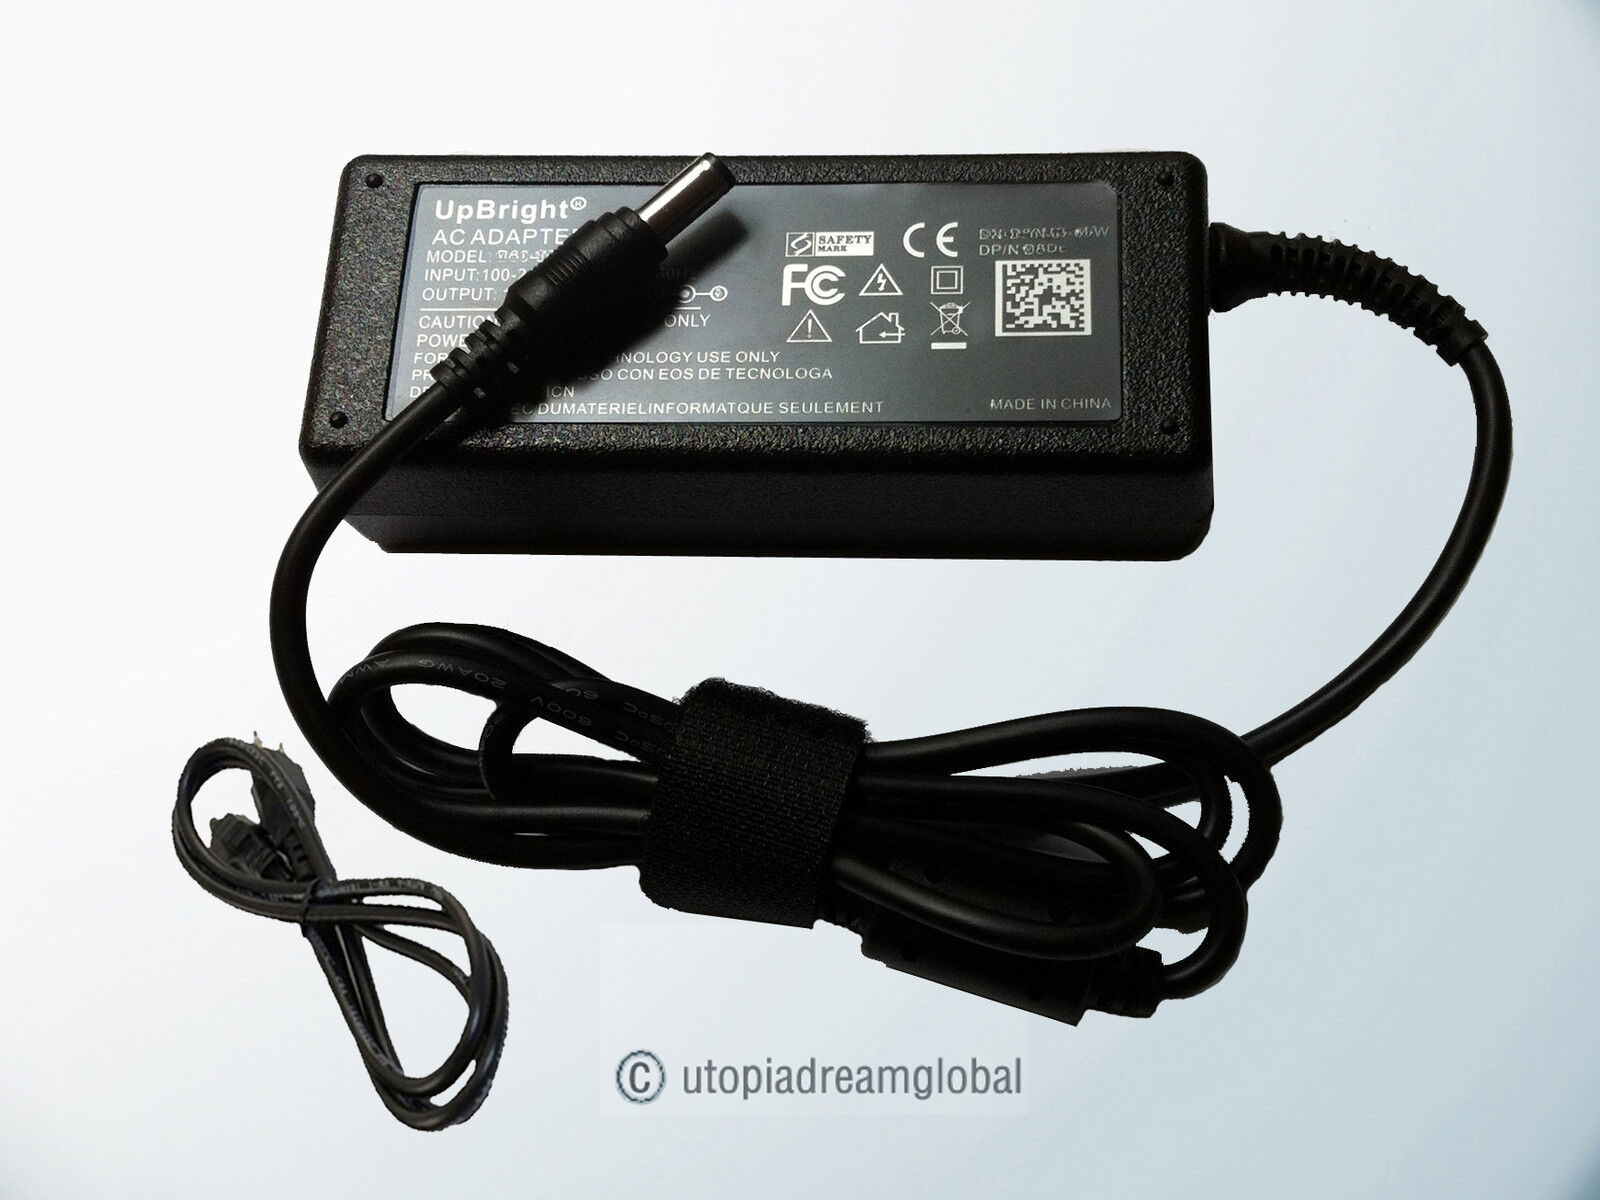 NEW AC/DC Adapter For HP Officejet 100 Mobile Printer CN551A CN551-64001 Charger